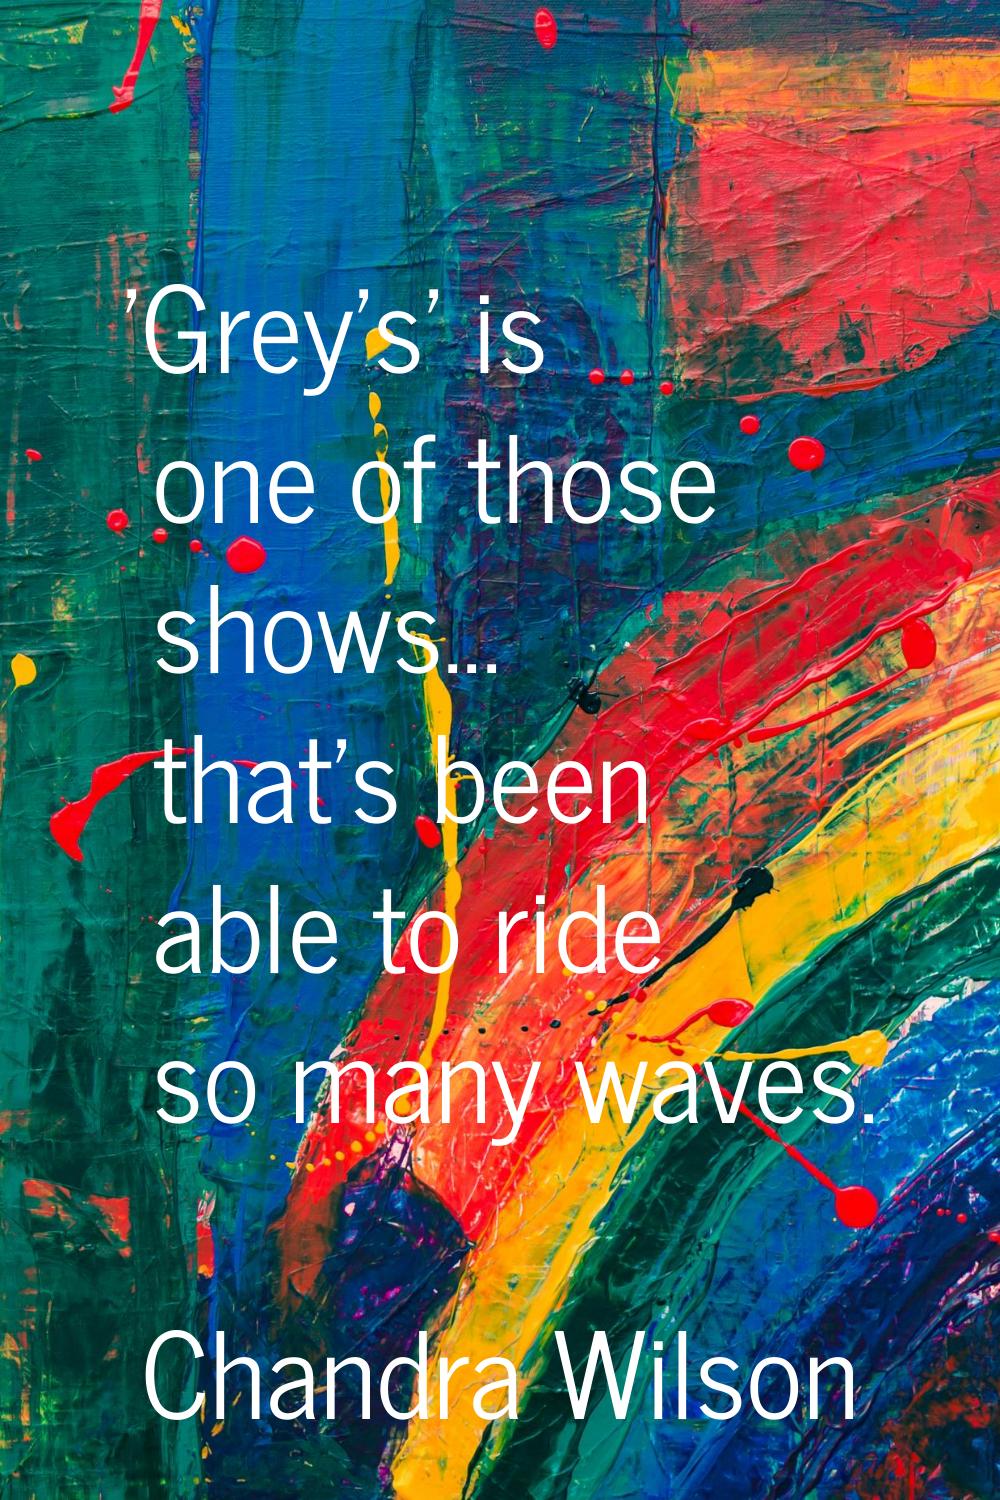 'Grey's' is one of those shows... that's been able to ride so many waves.